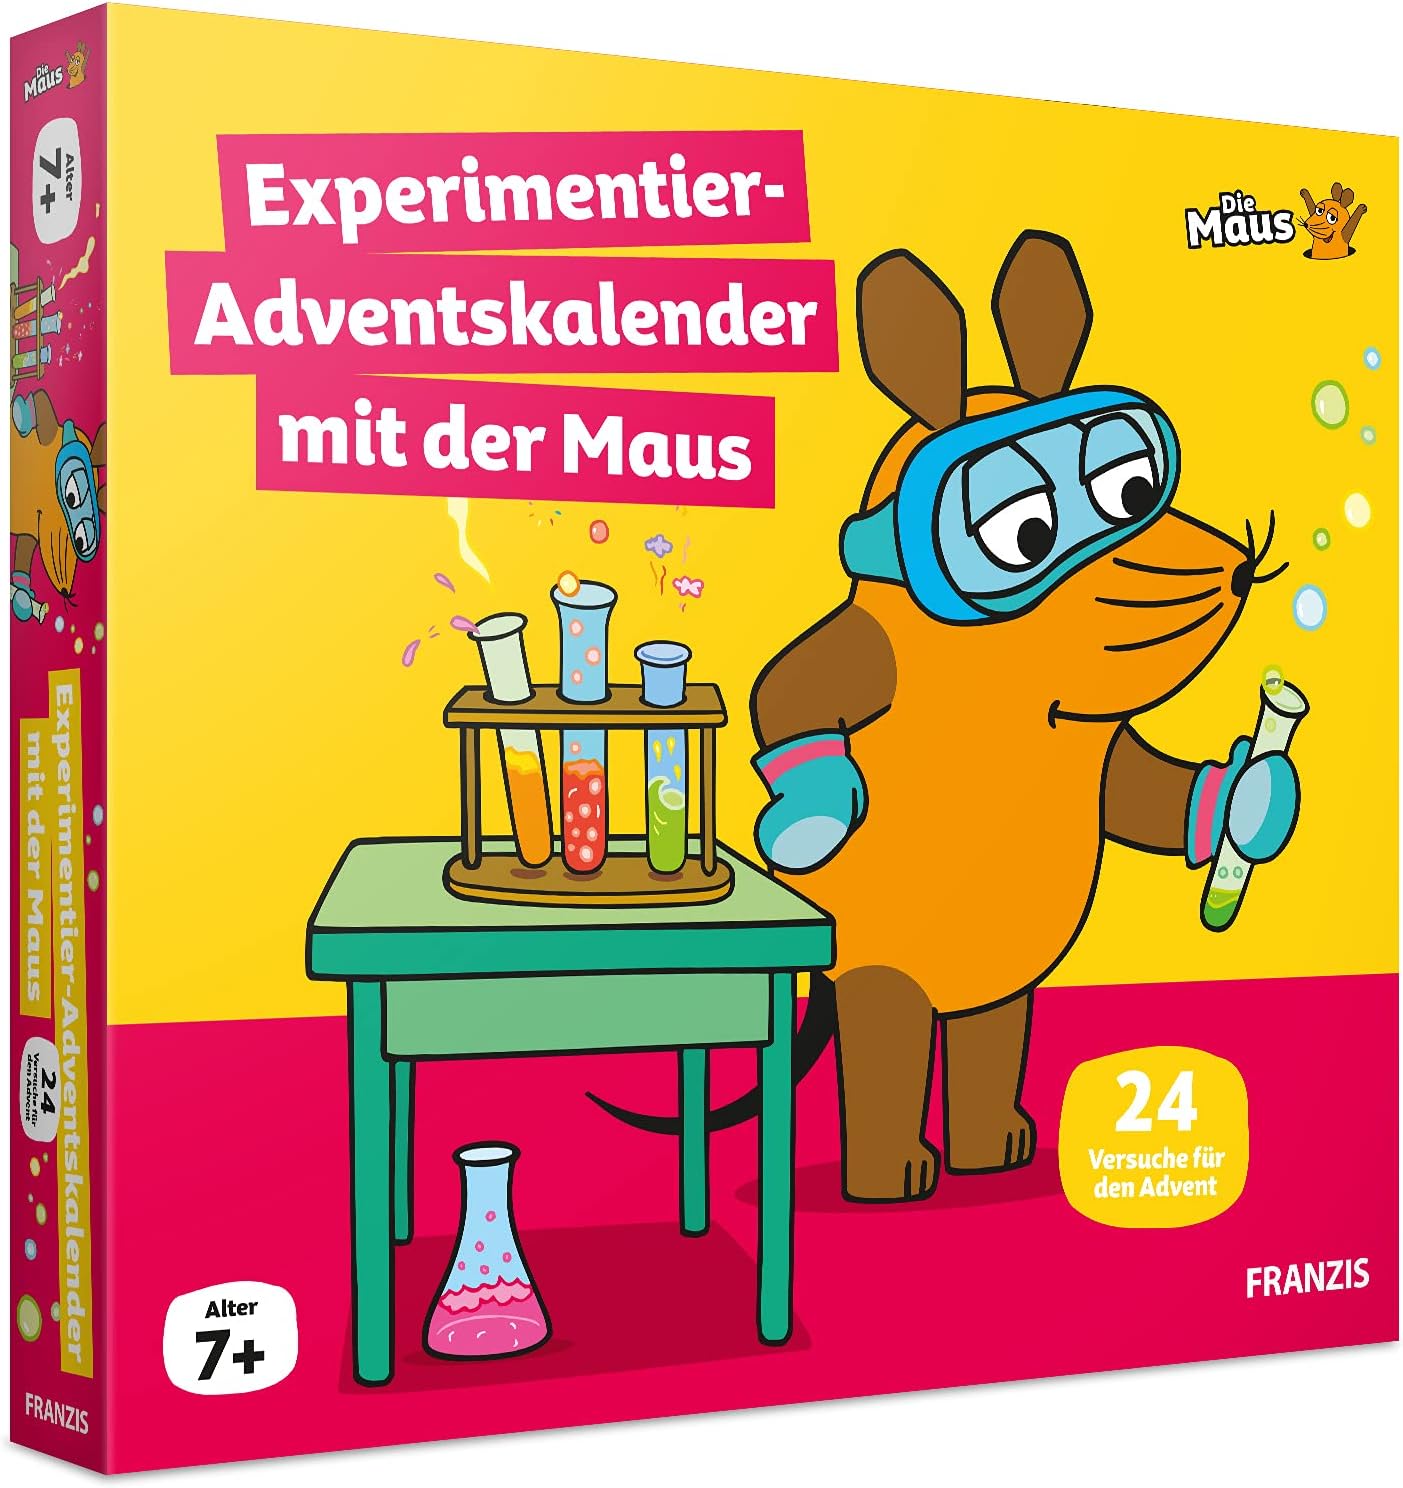 FRANZIS 67185 Experiment Advent Calendar with the Mouse, 24 Attempts for Advent to Discover, Research and Puzzles, for Children from 7 Years